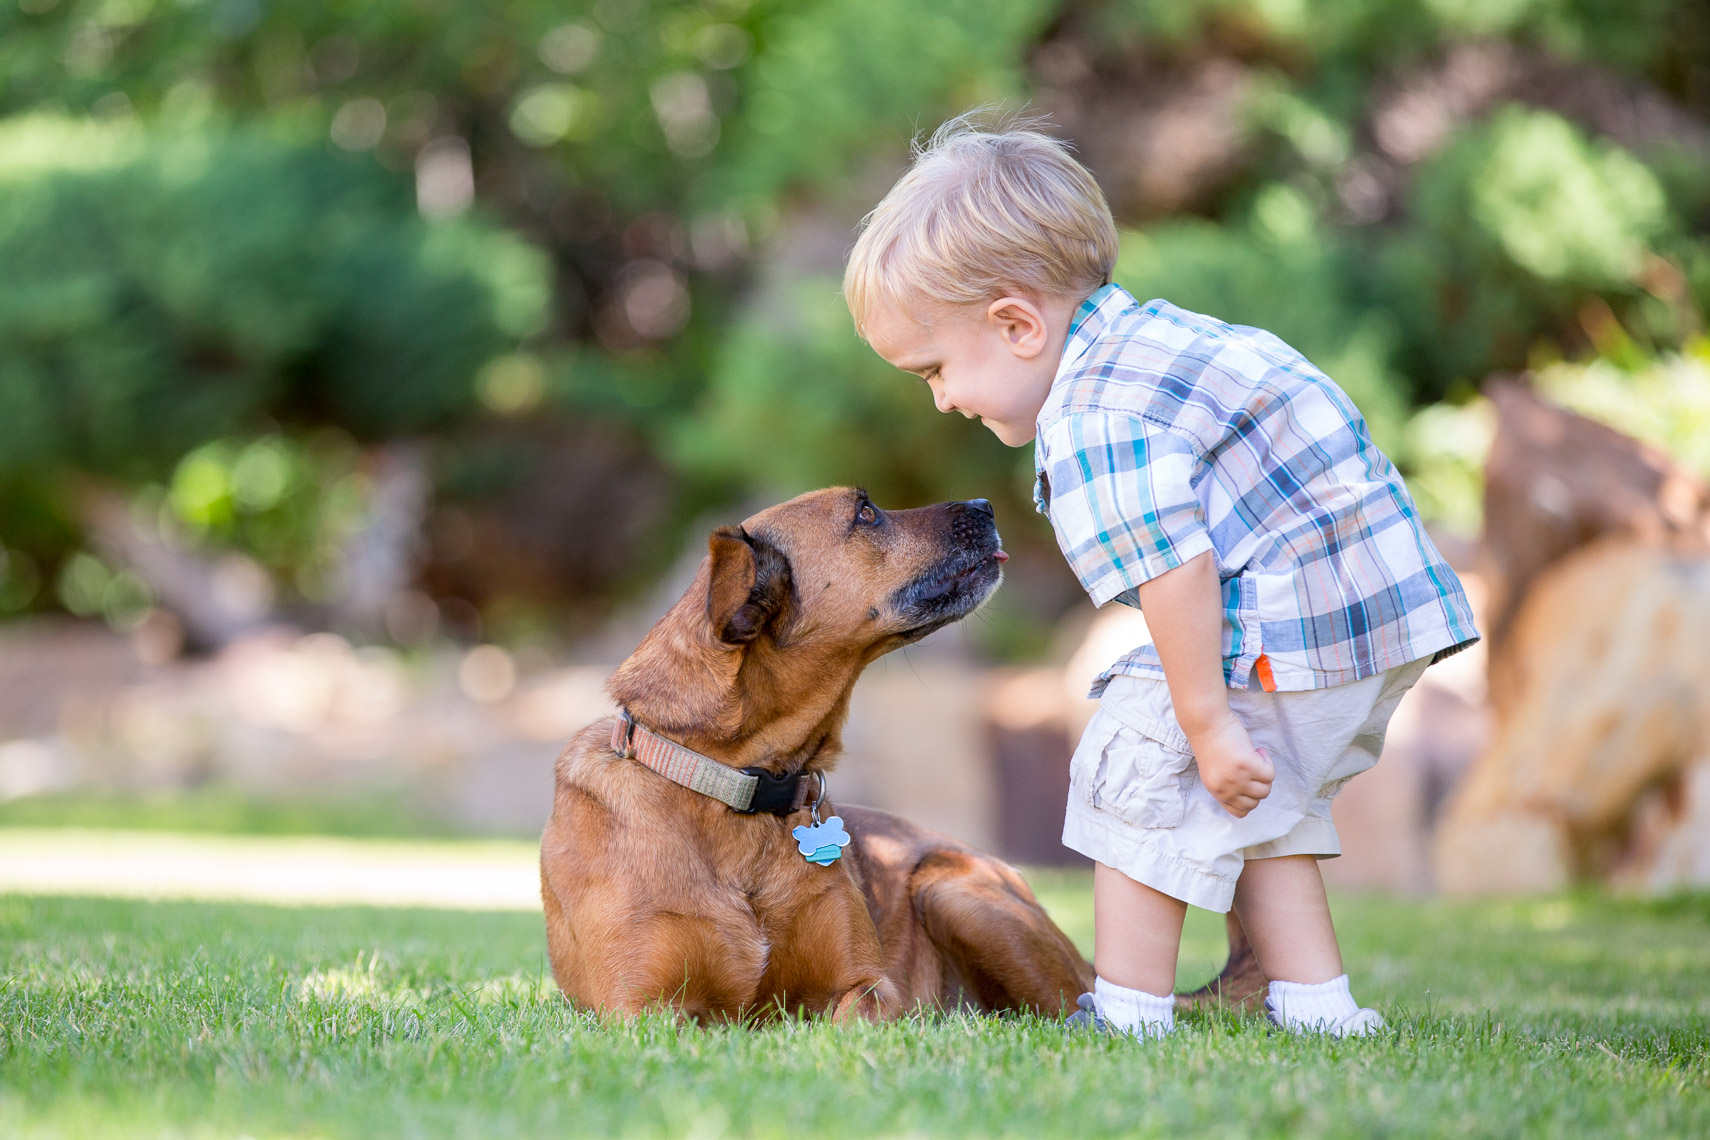 Nothing better than a boy and his dog.  Rare disease work on location with healthcare photographer Robert Houser